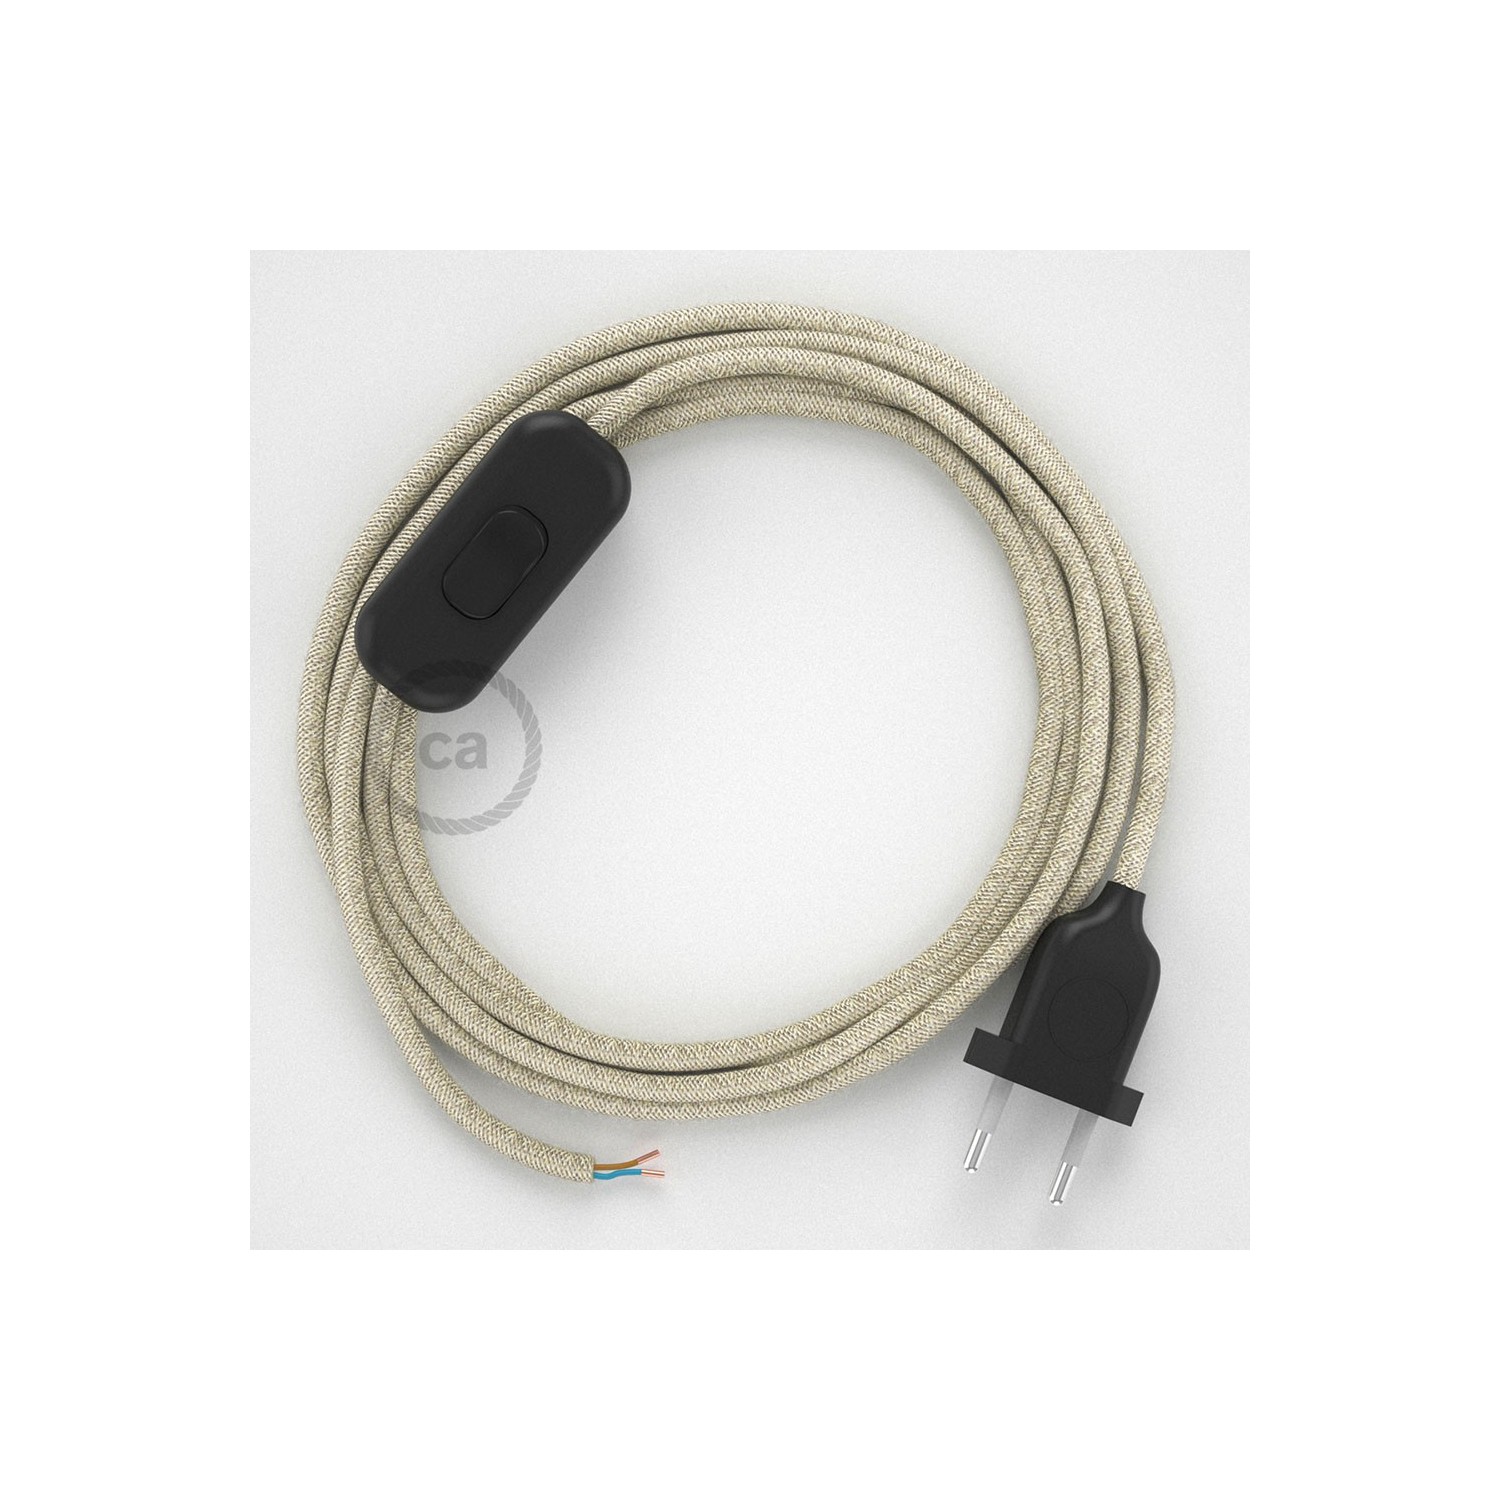 Lamp wiring, RN01 Neutral Natural Linen 1,80 m. Choose the colour of the switch and plug.